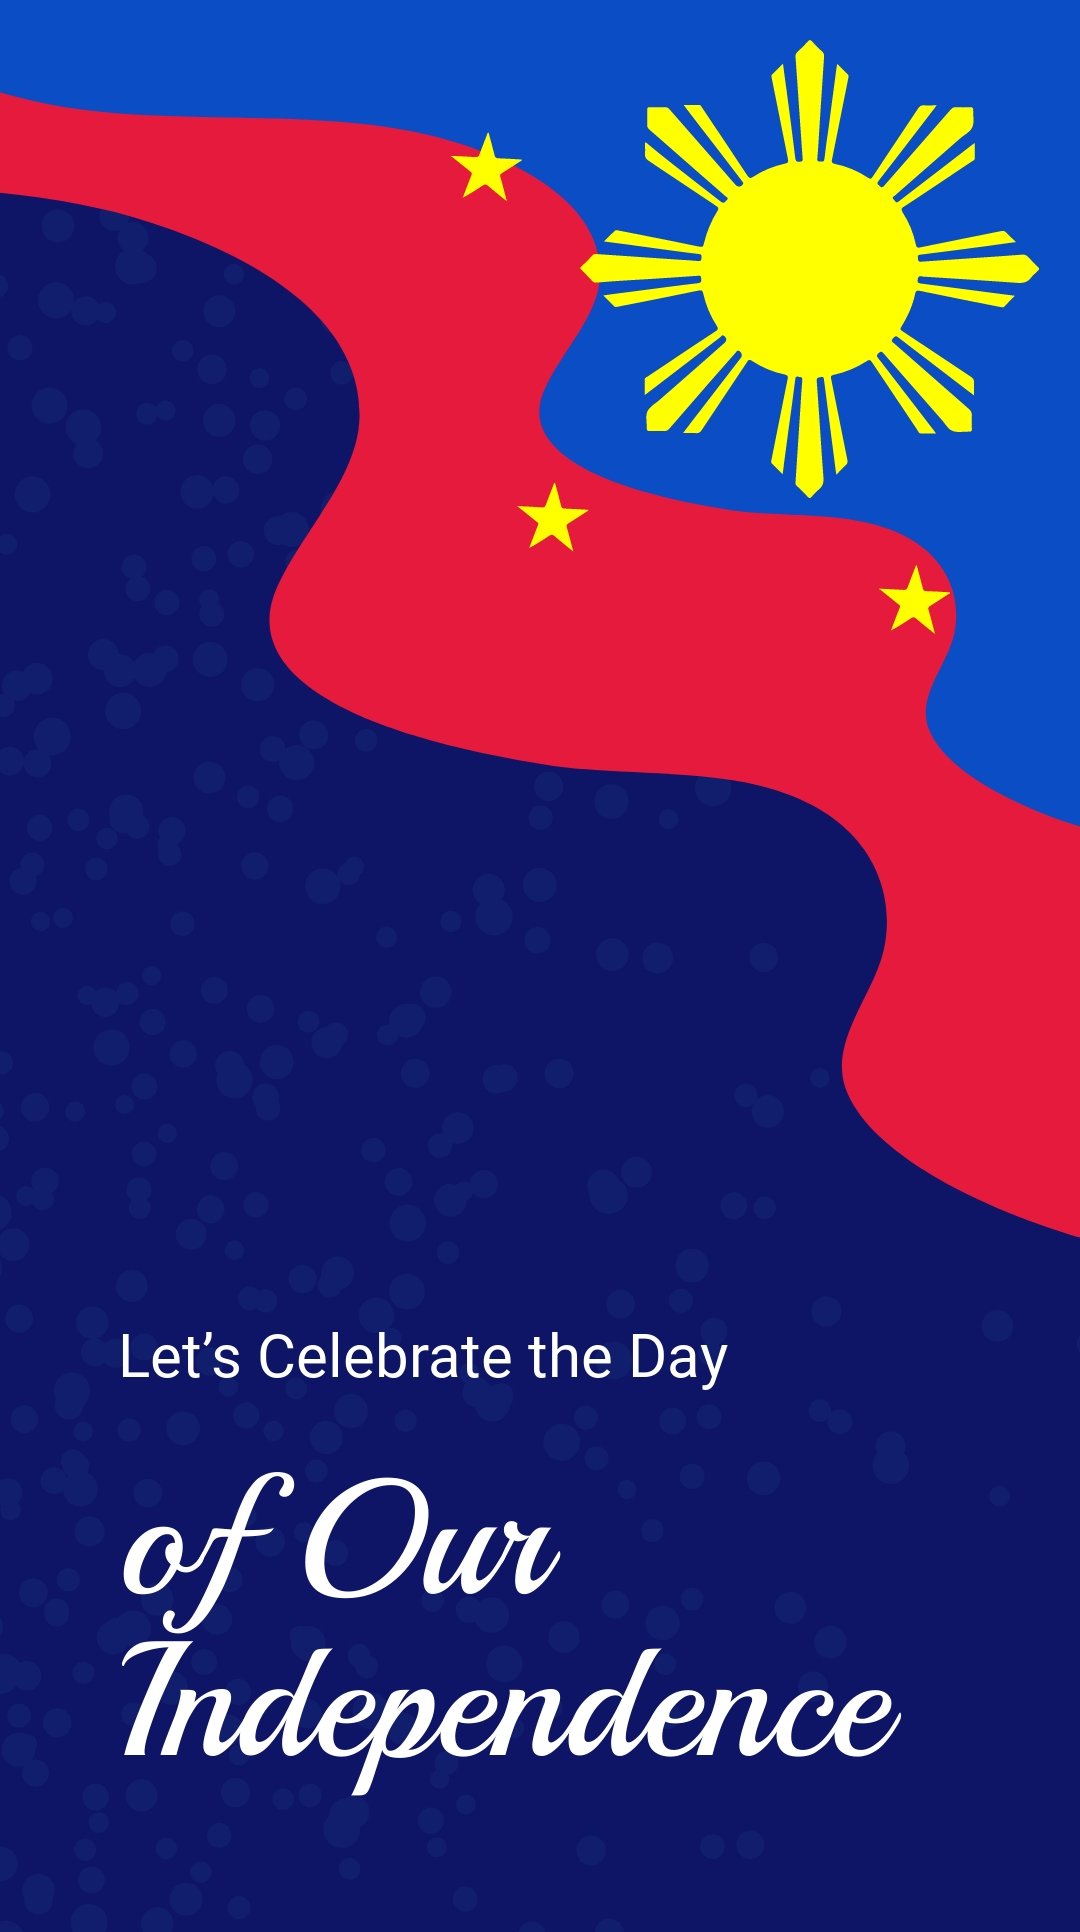 Philippines Independence Day Celebration Whatsapp Post Template.jpe